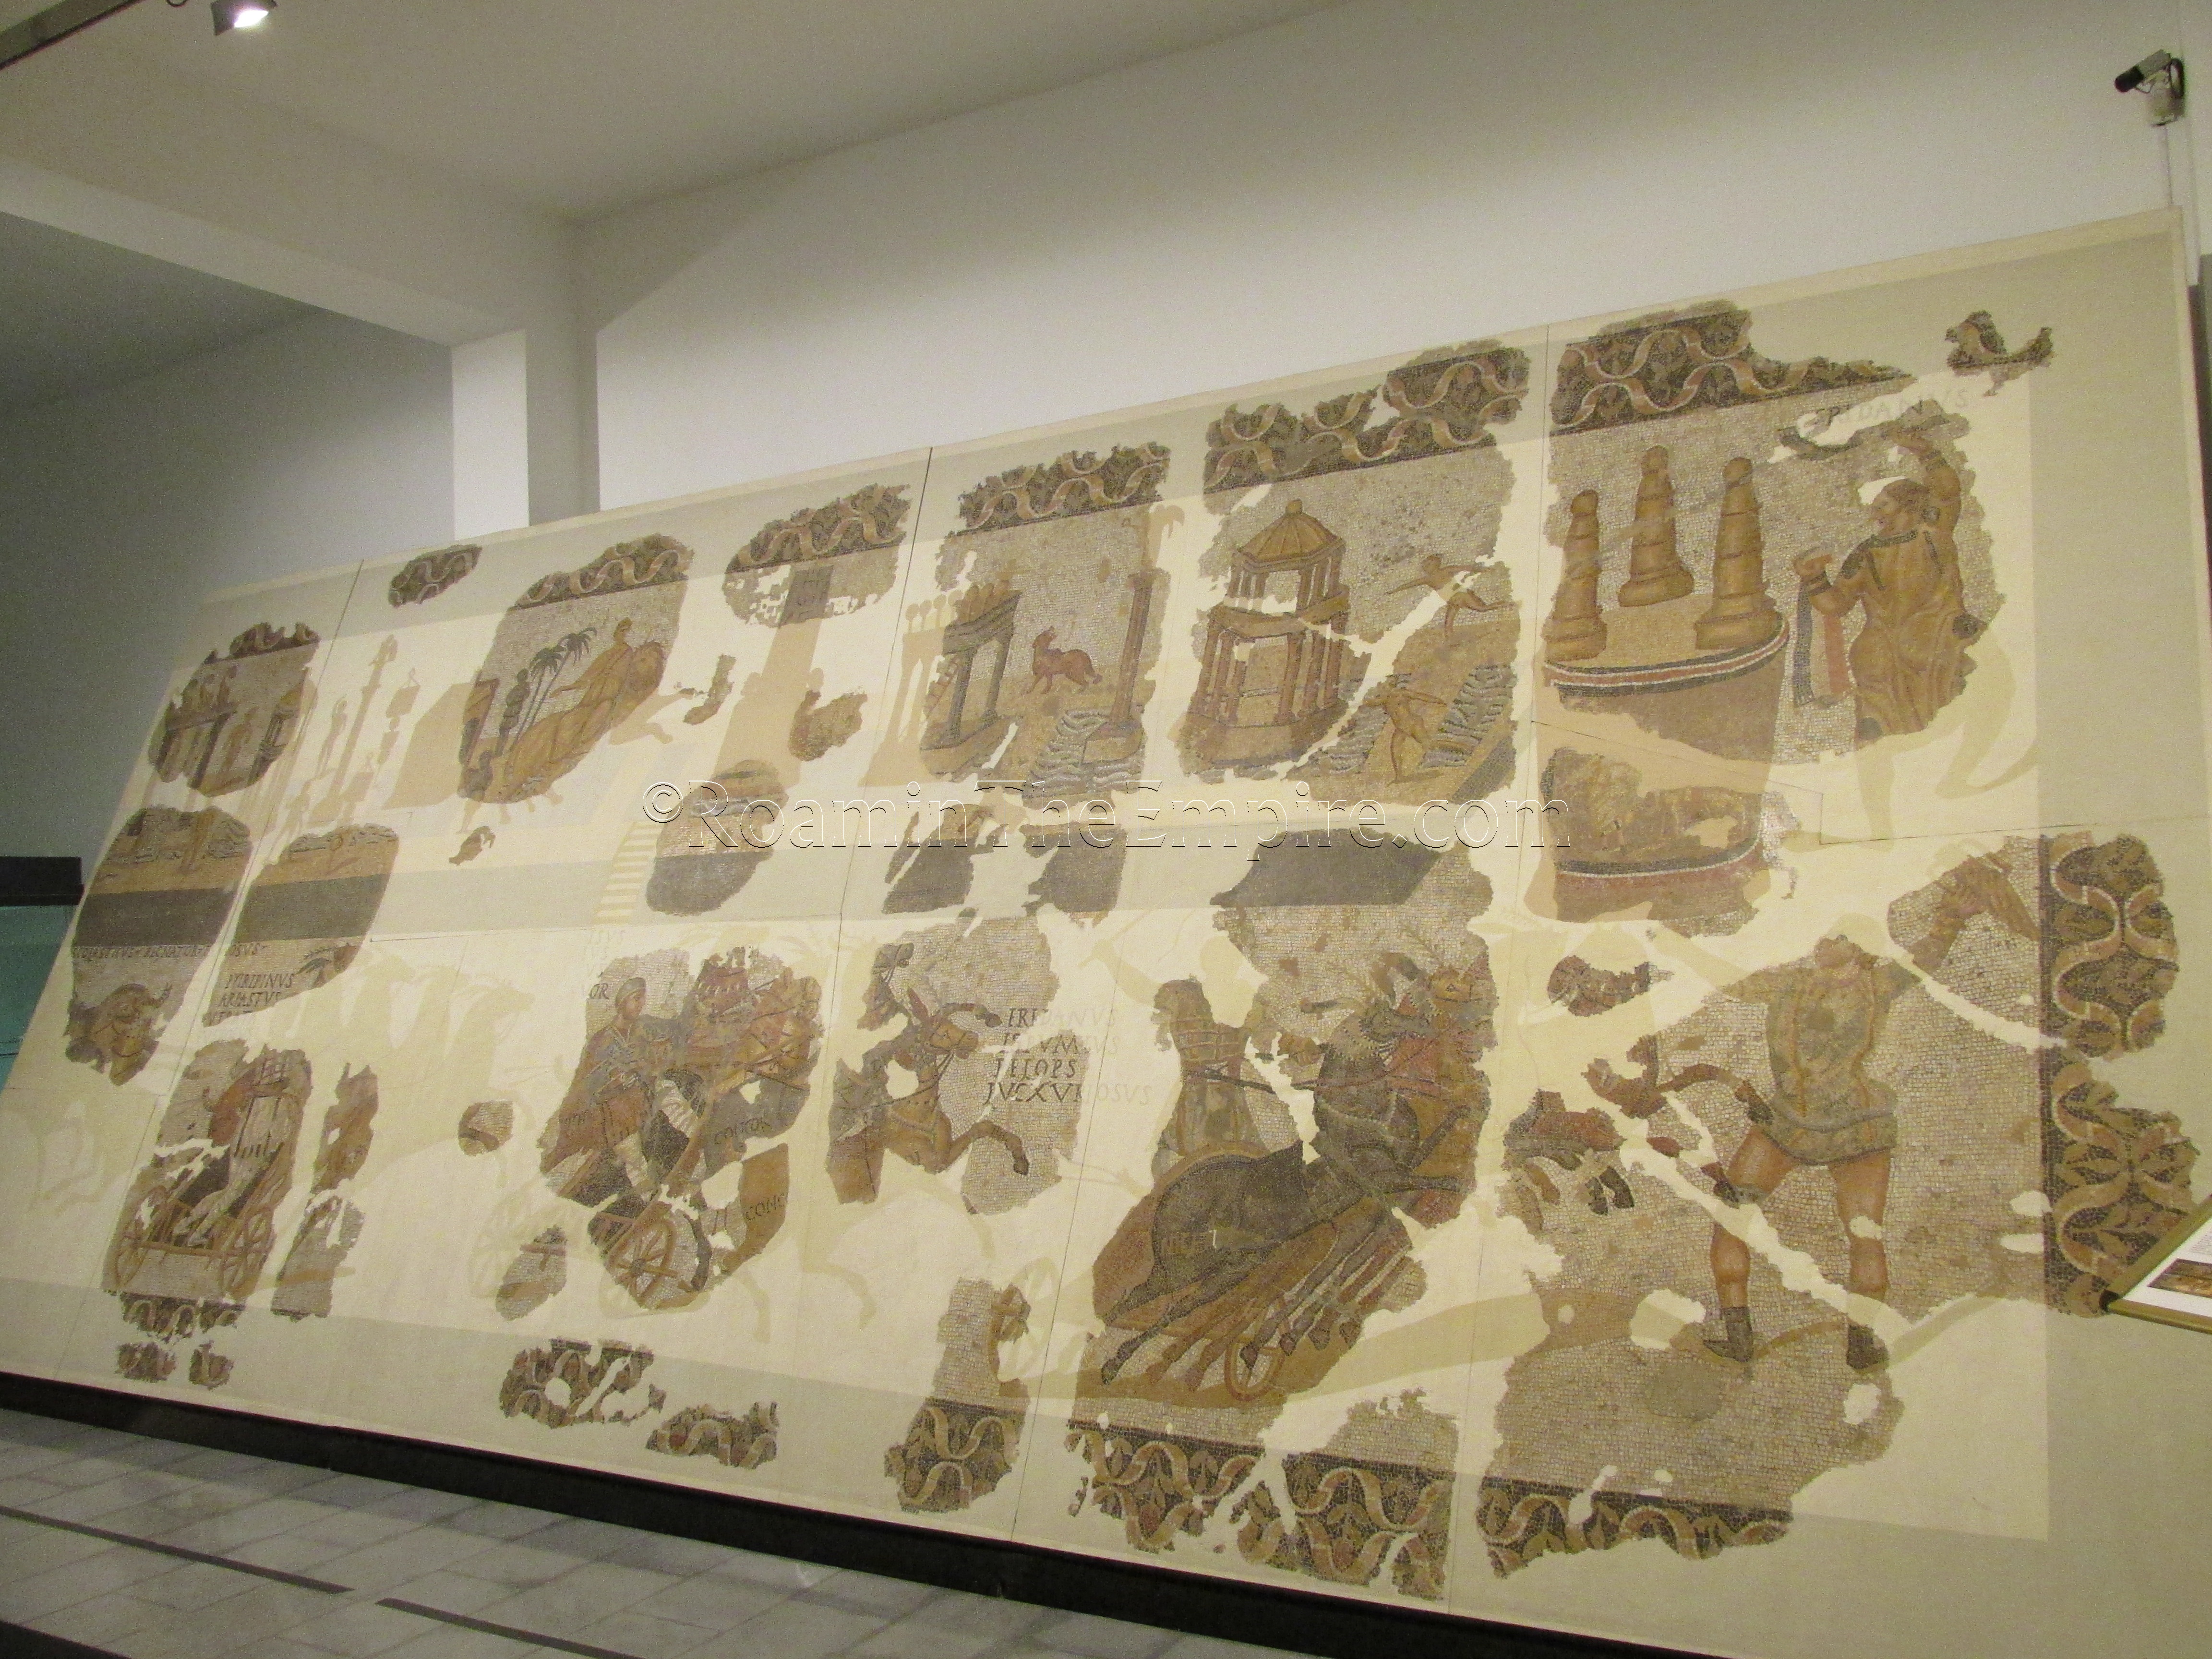 Circus mosaic depicting a chariot race with the names of the horses involved.